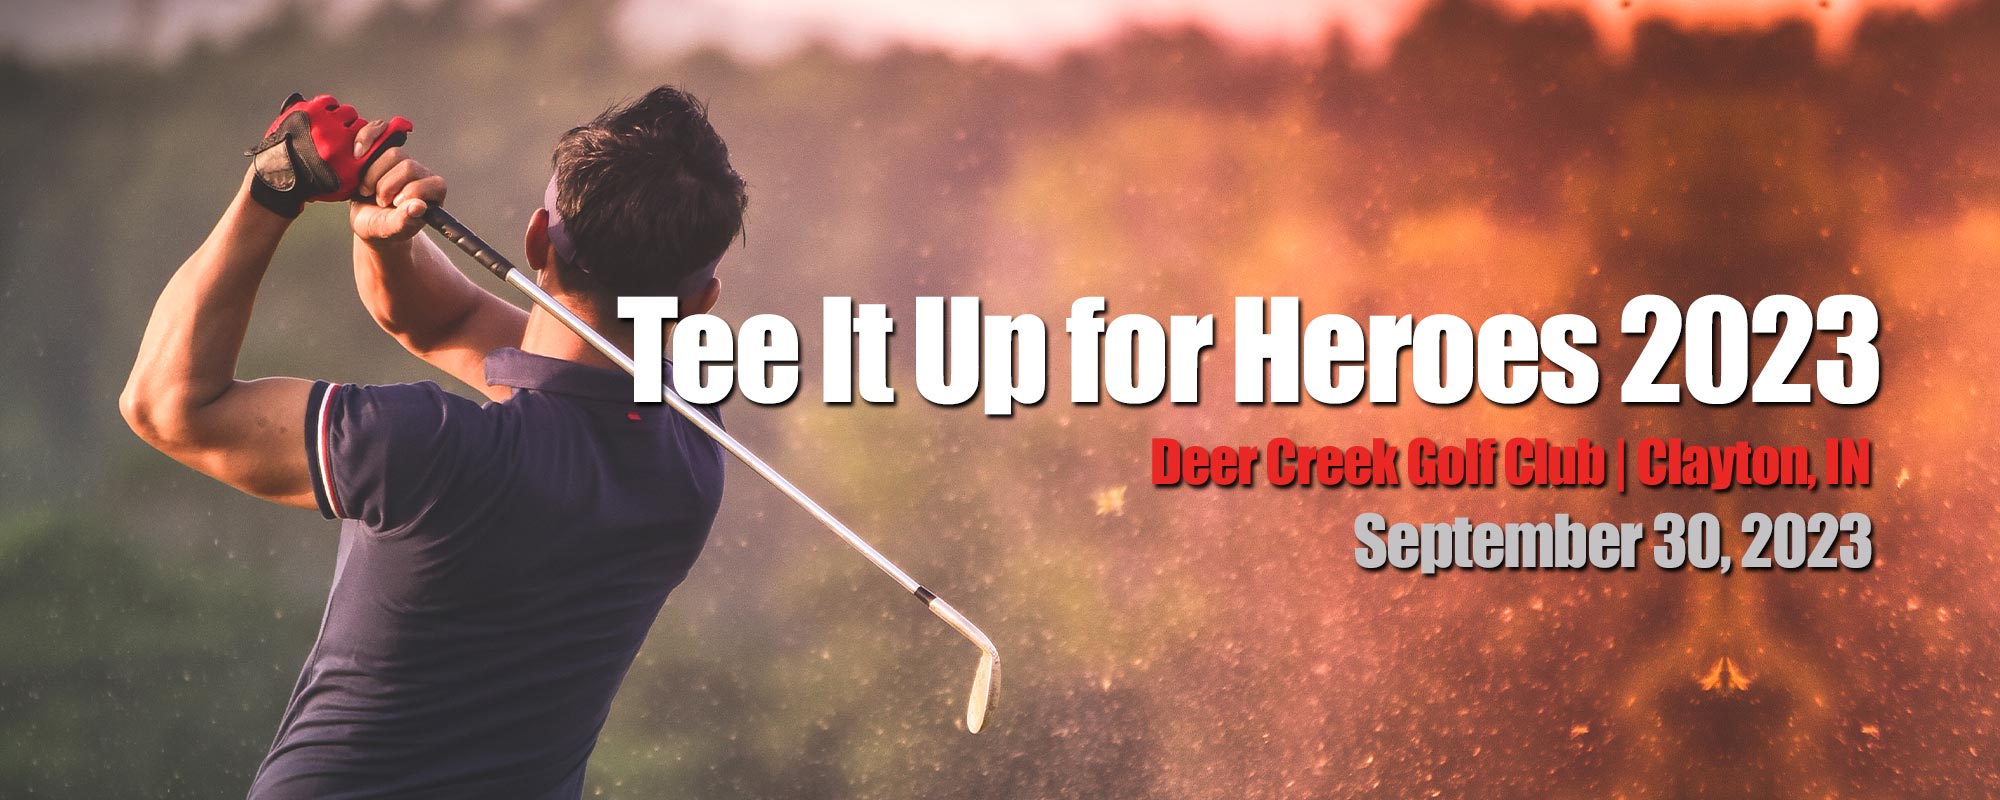 Tee It Up for Heroes 2023